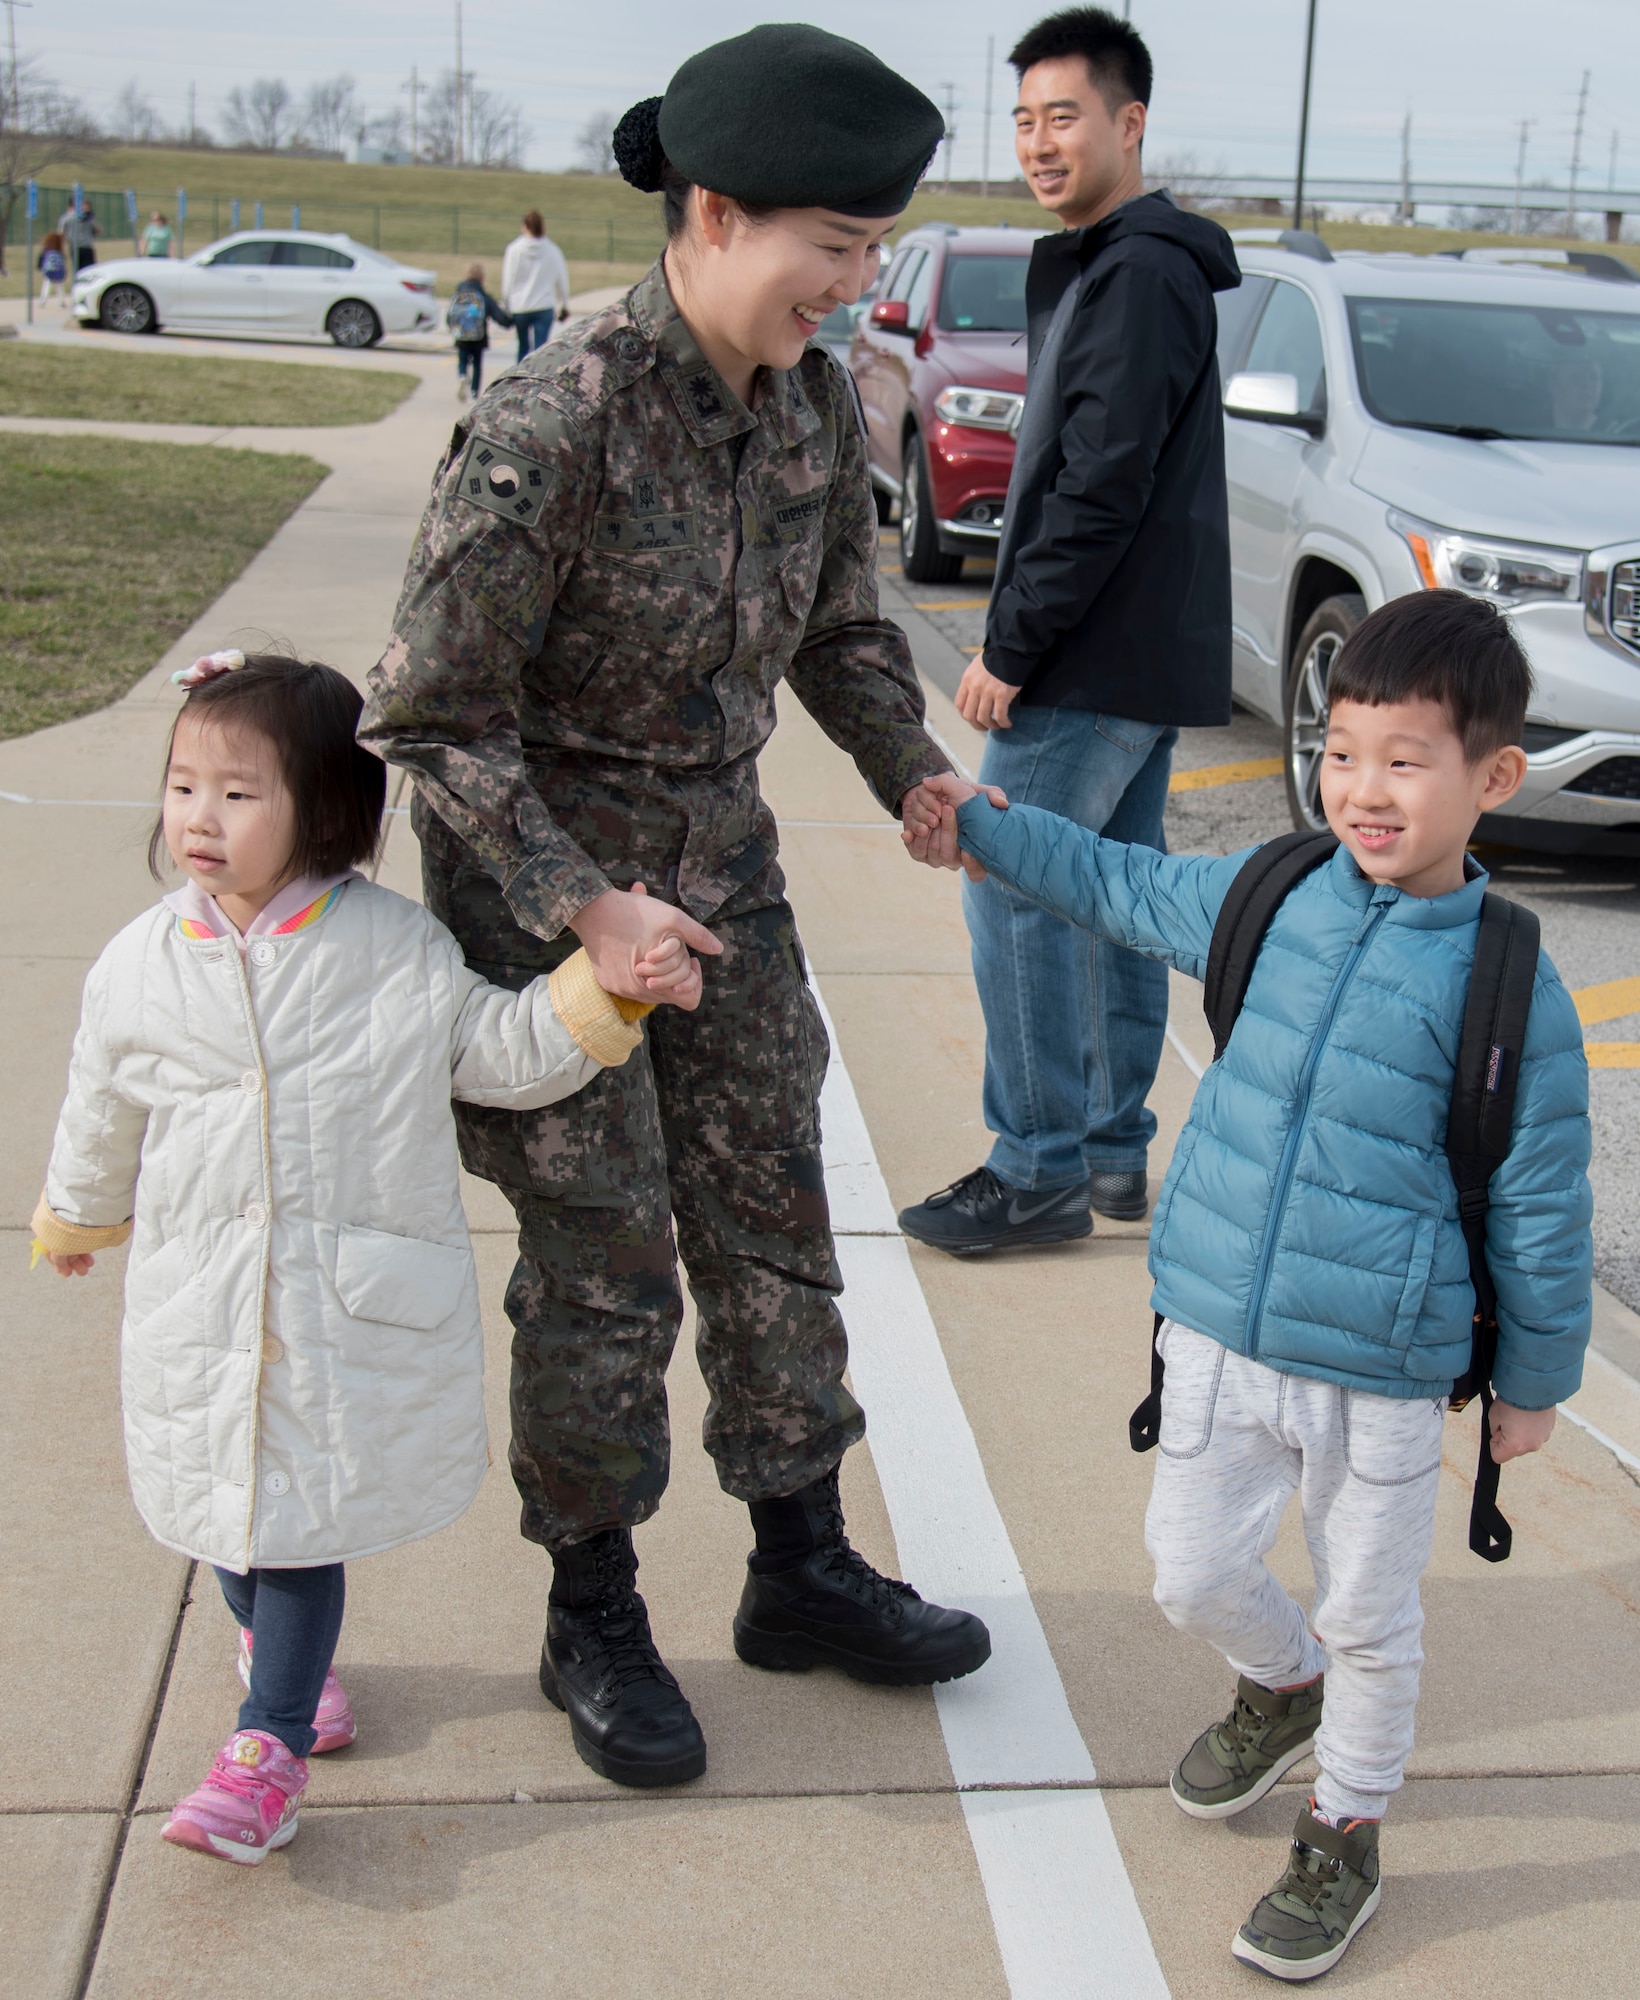 Maj. Paek with her husband and children after school.